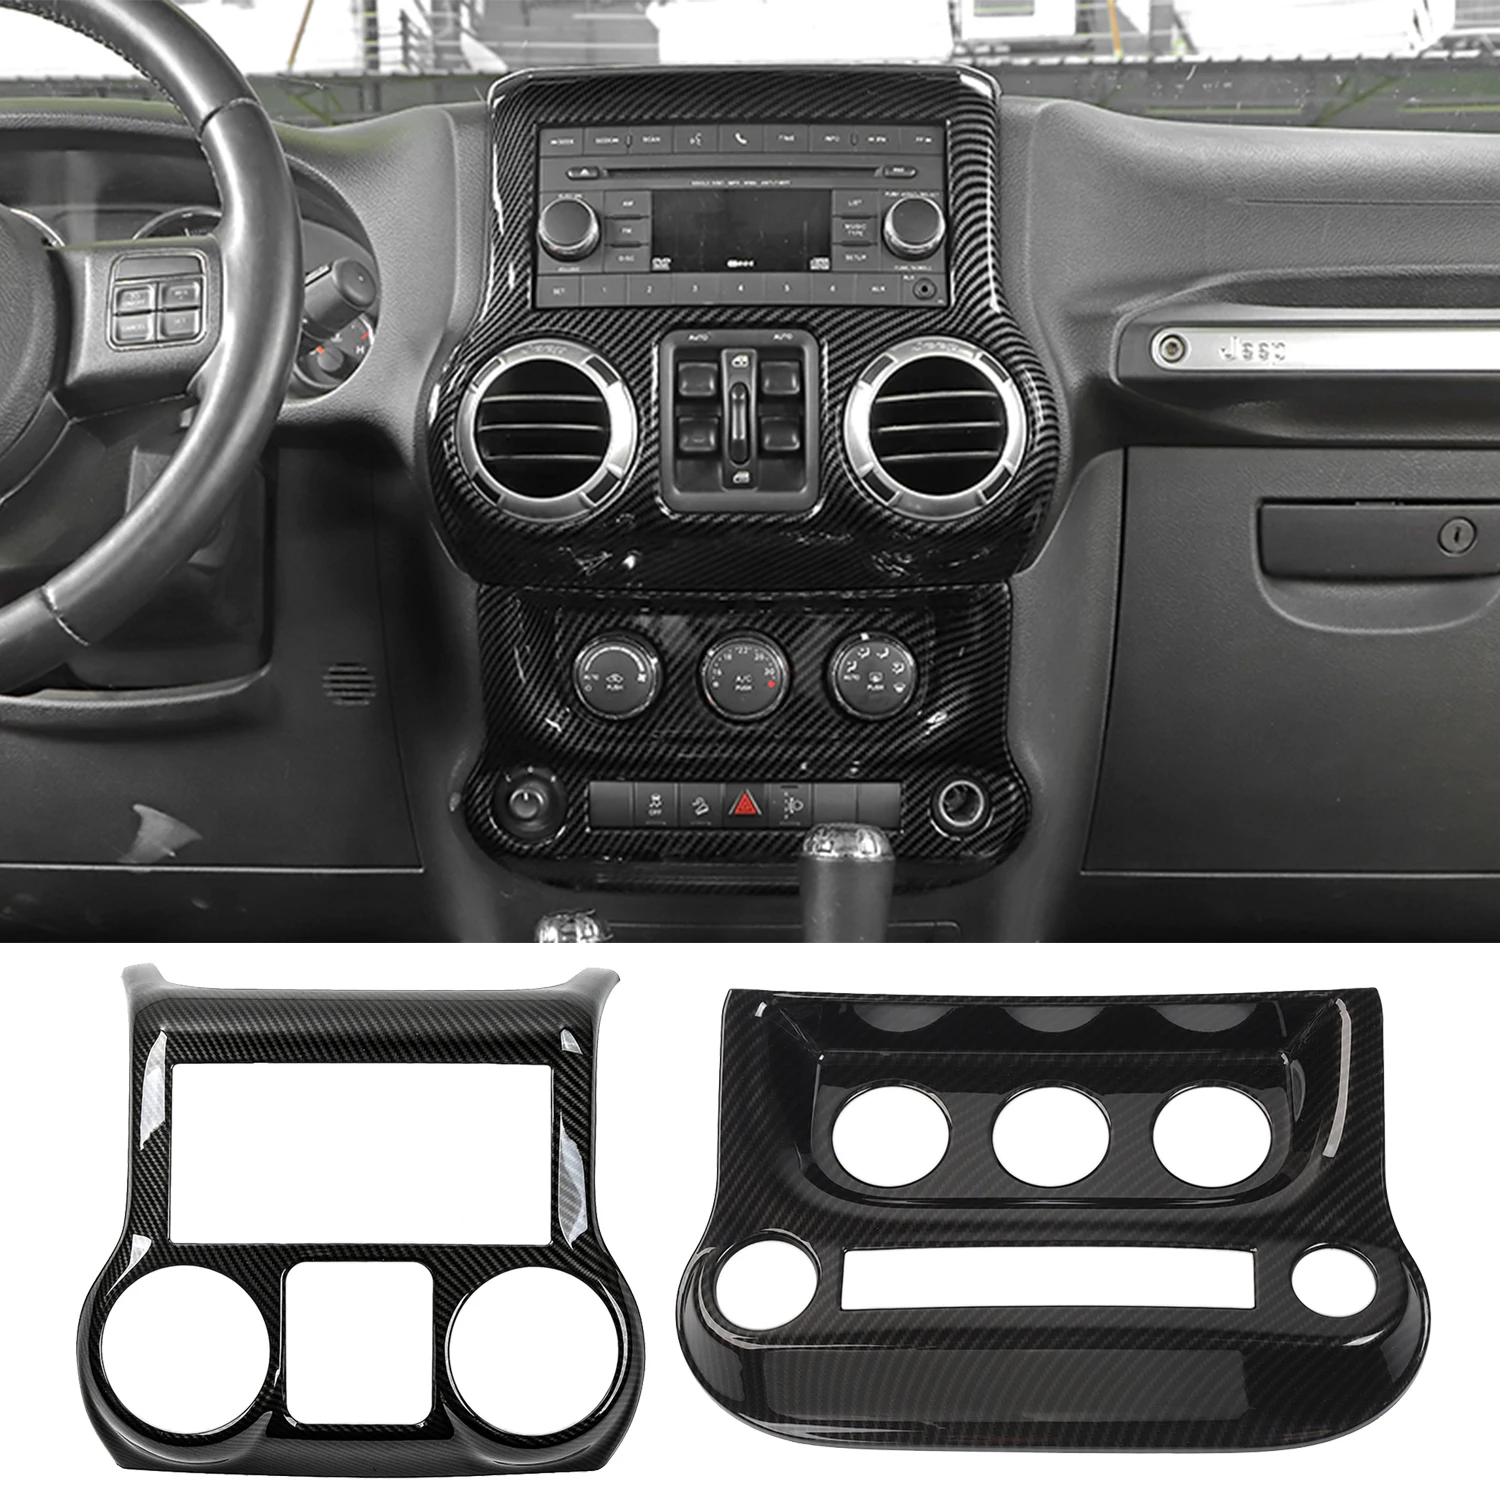 

Car Center Console Dashboard Air Conditioner Switch Panel Decoration Cover for Jeep Wrangler JK 2011-2017 Interior Accessories